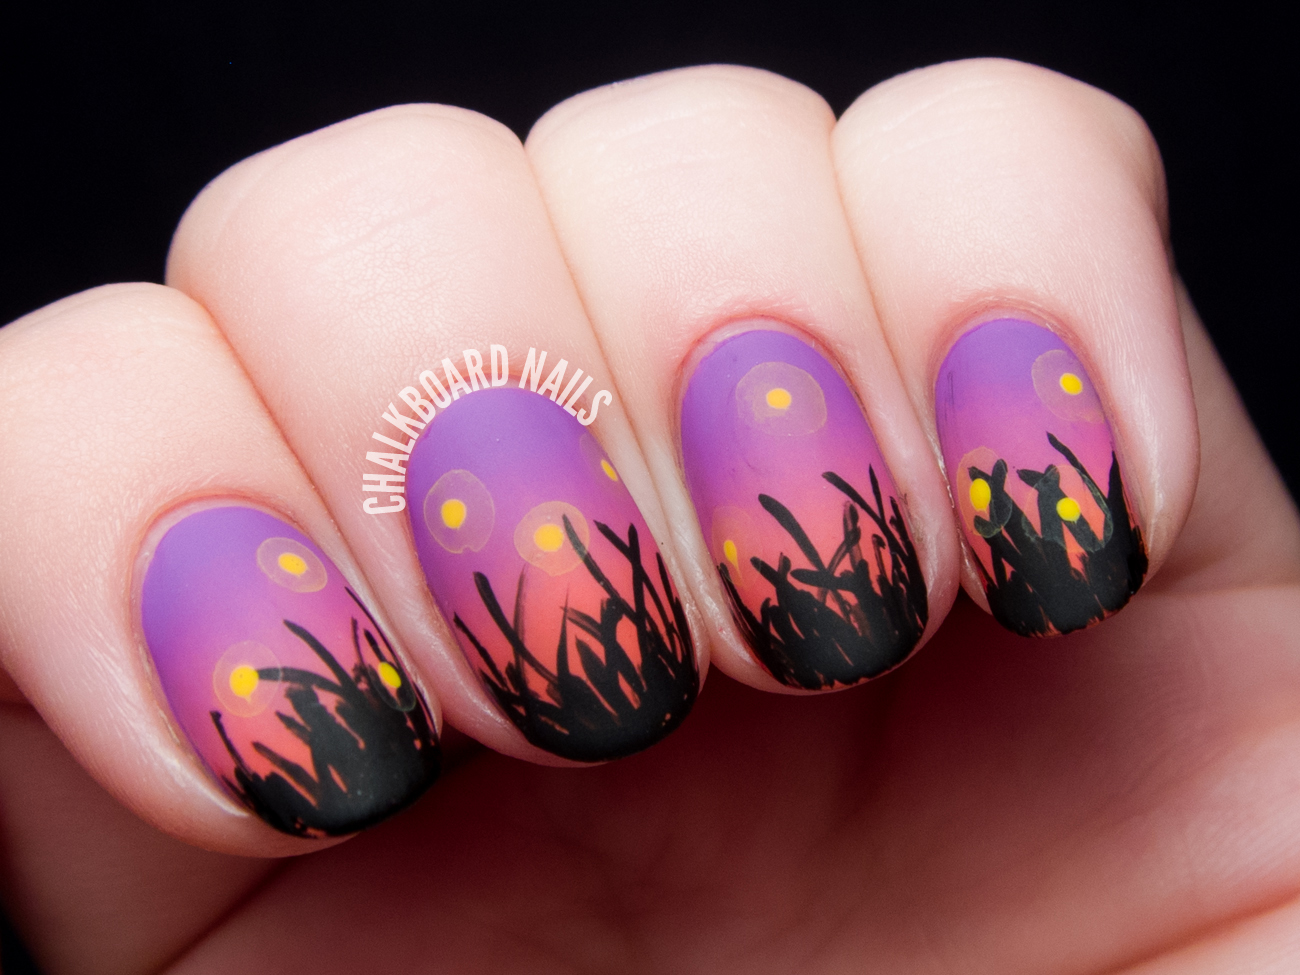 Fireflies in the Field at Sunset by @chalkboardnails